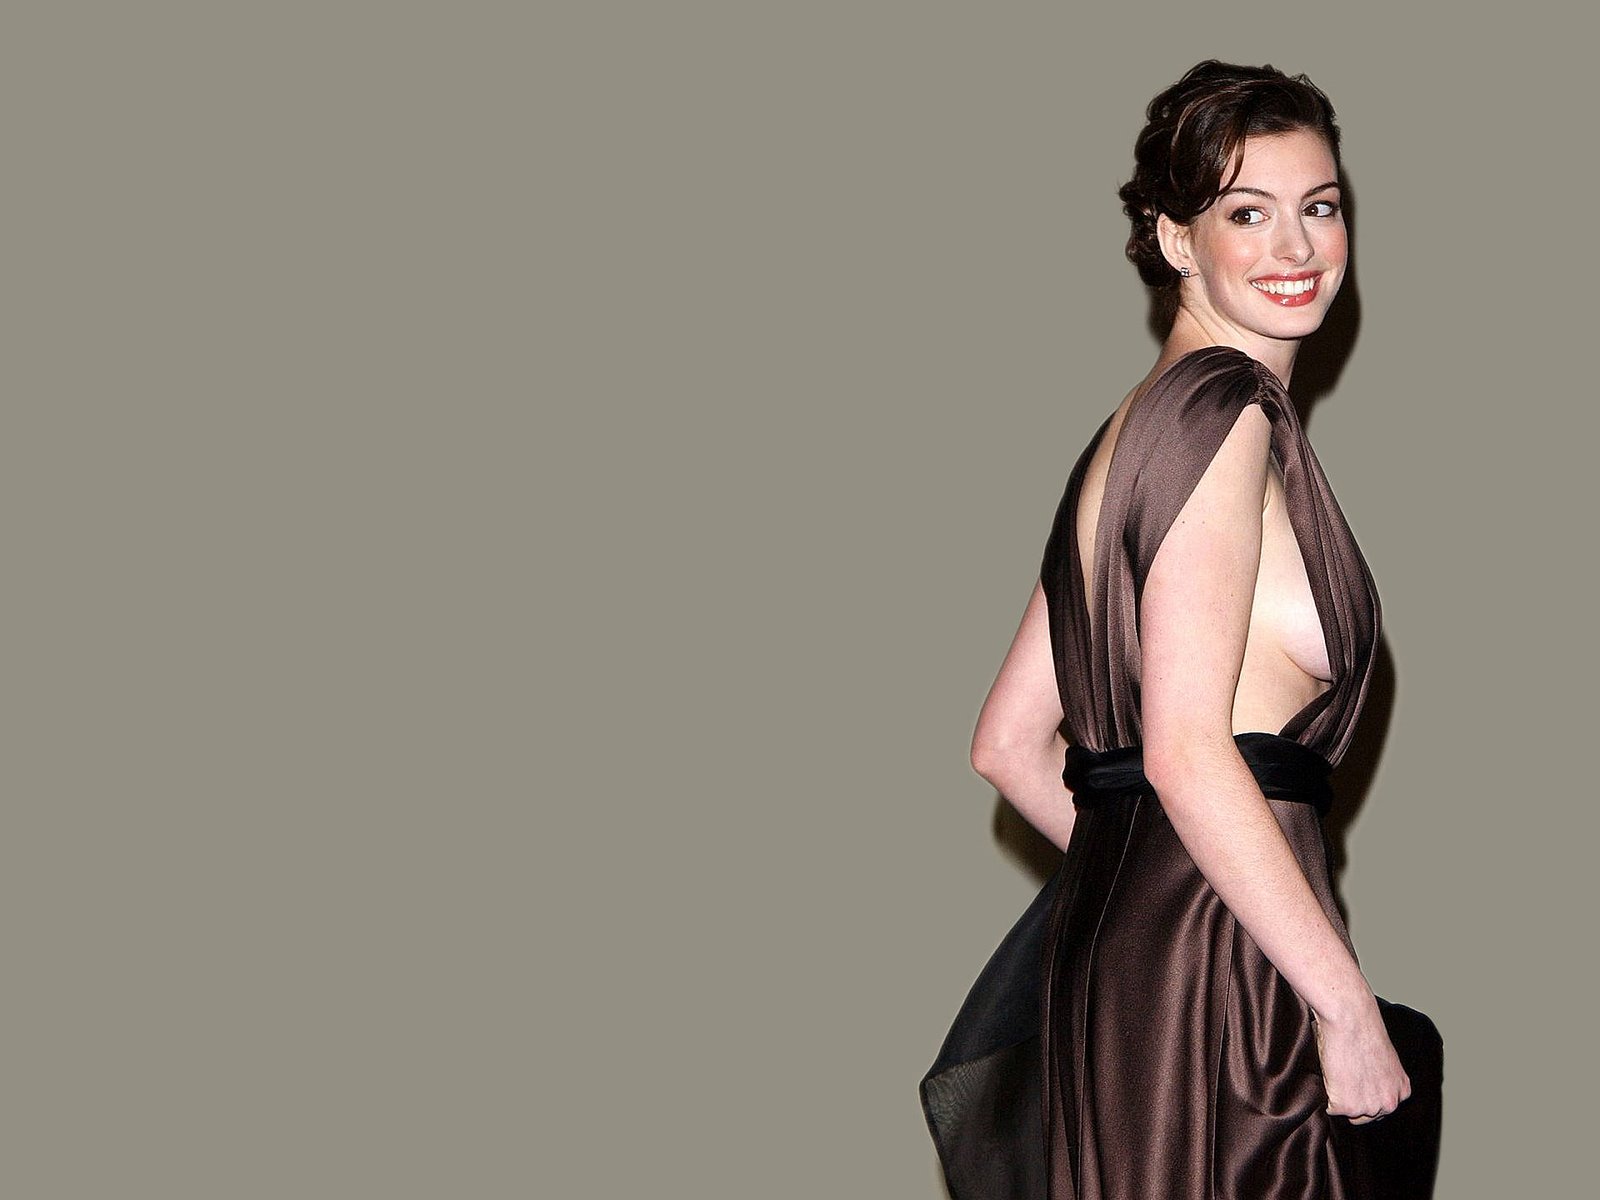 Cool Image Anne Hathaway Sexy 